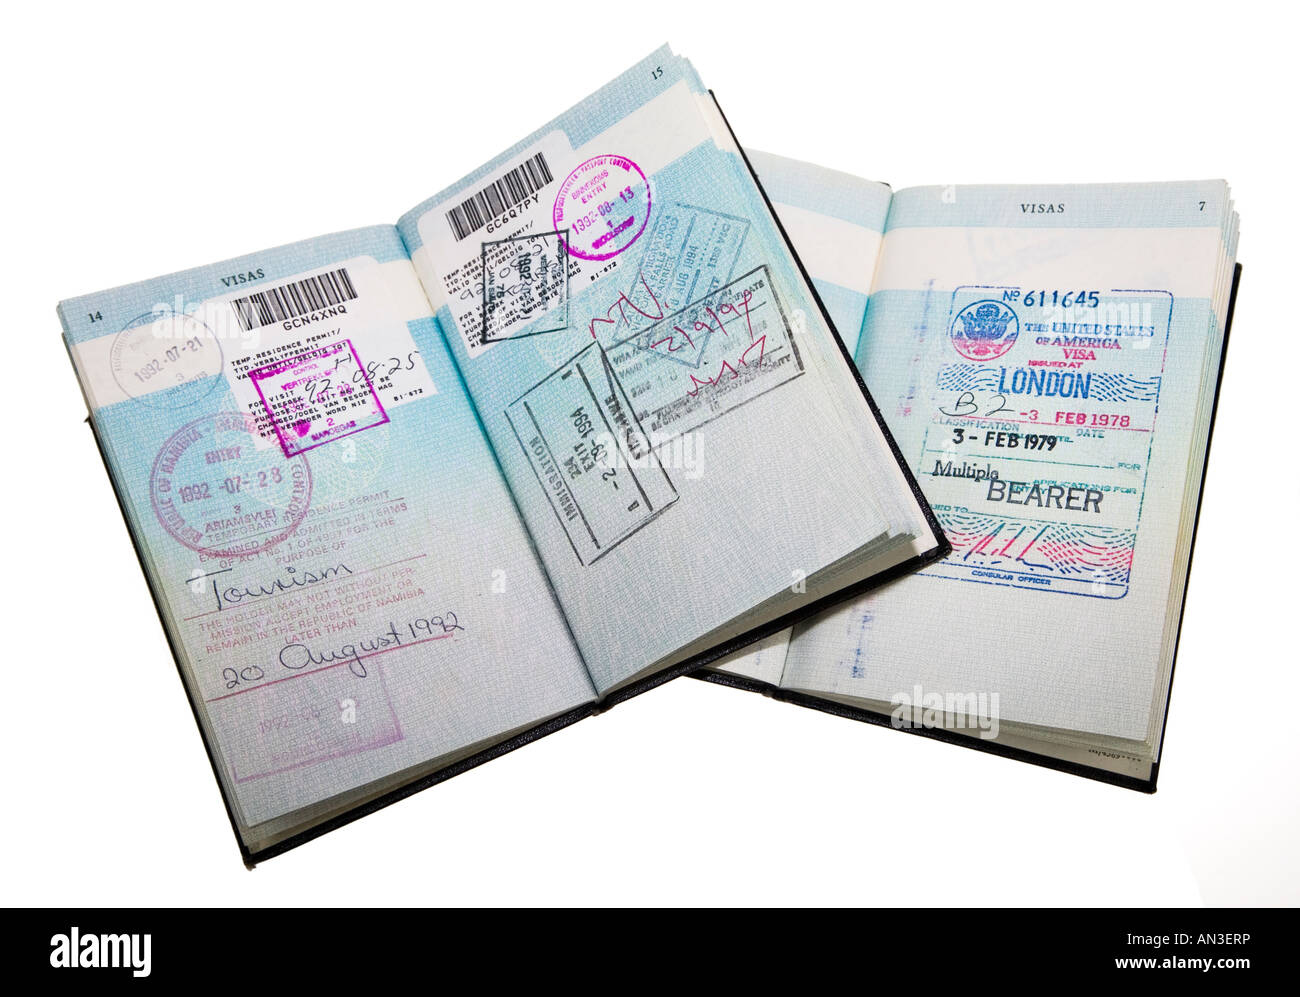 Two old style UK passports with port of entry stamps and a USA visa waiver Stock Photo